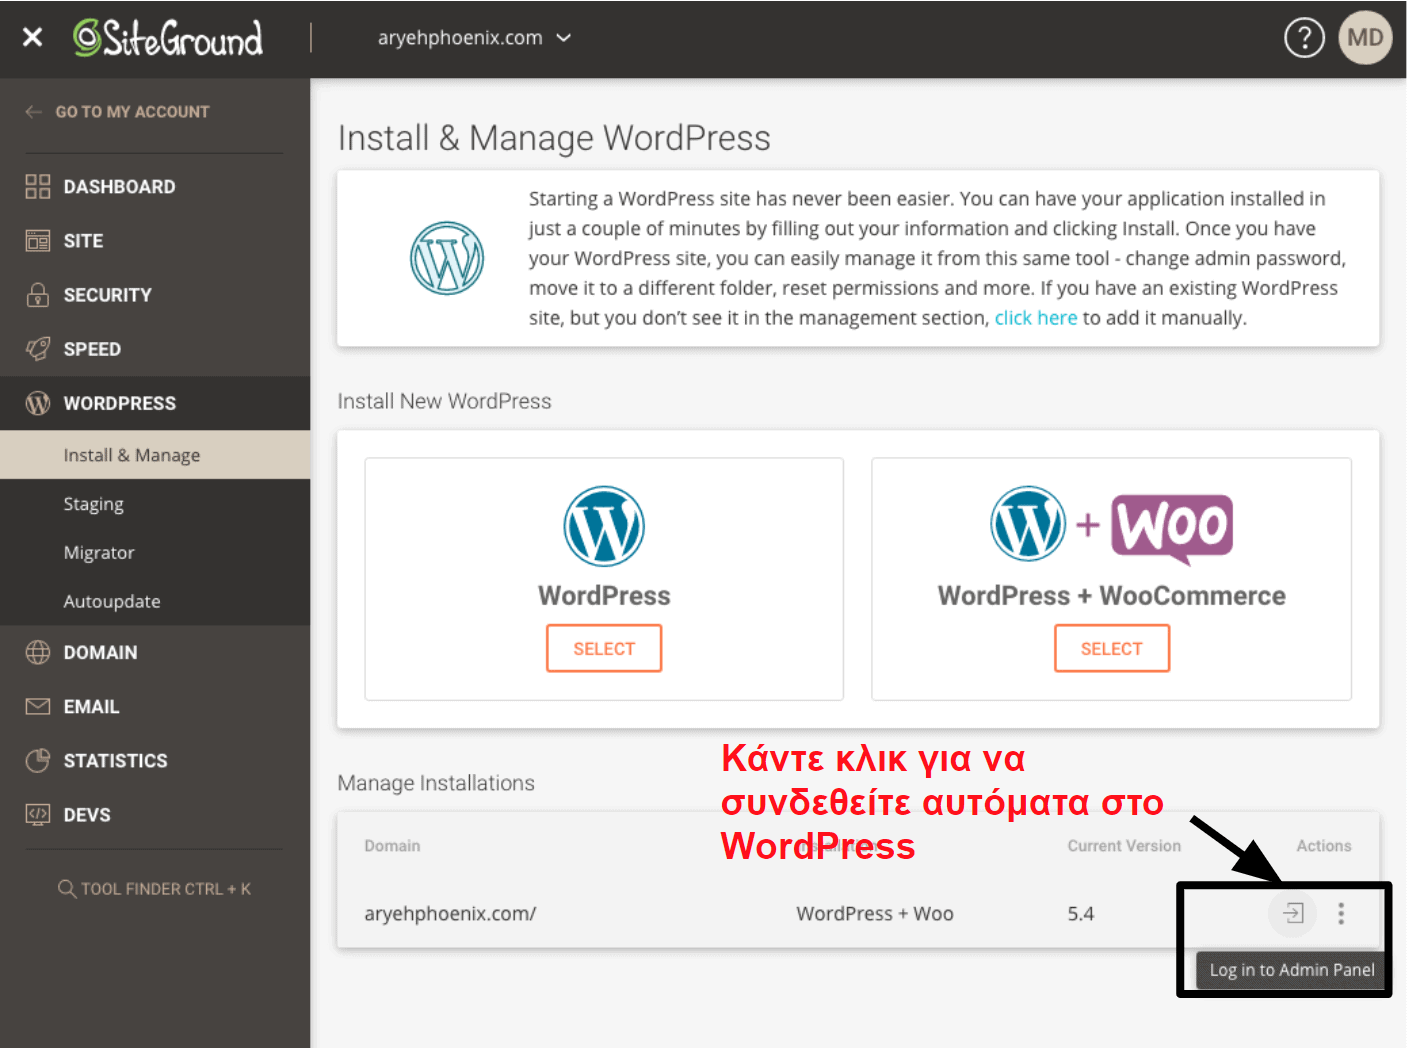 SiteGround offers a one click login option for your WordPress dashboard EL15